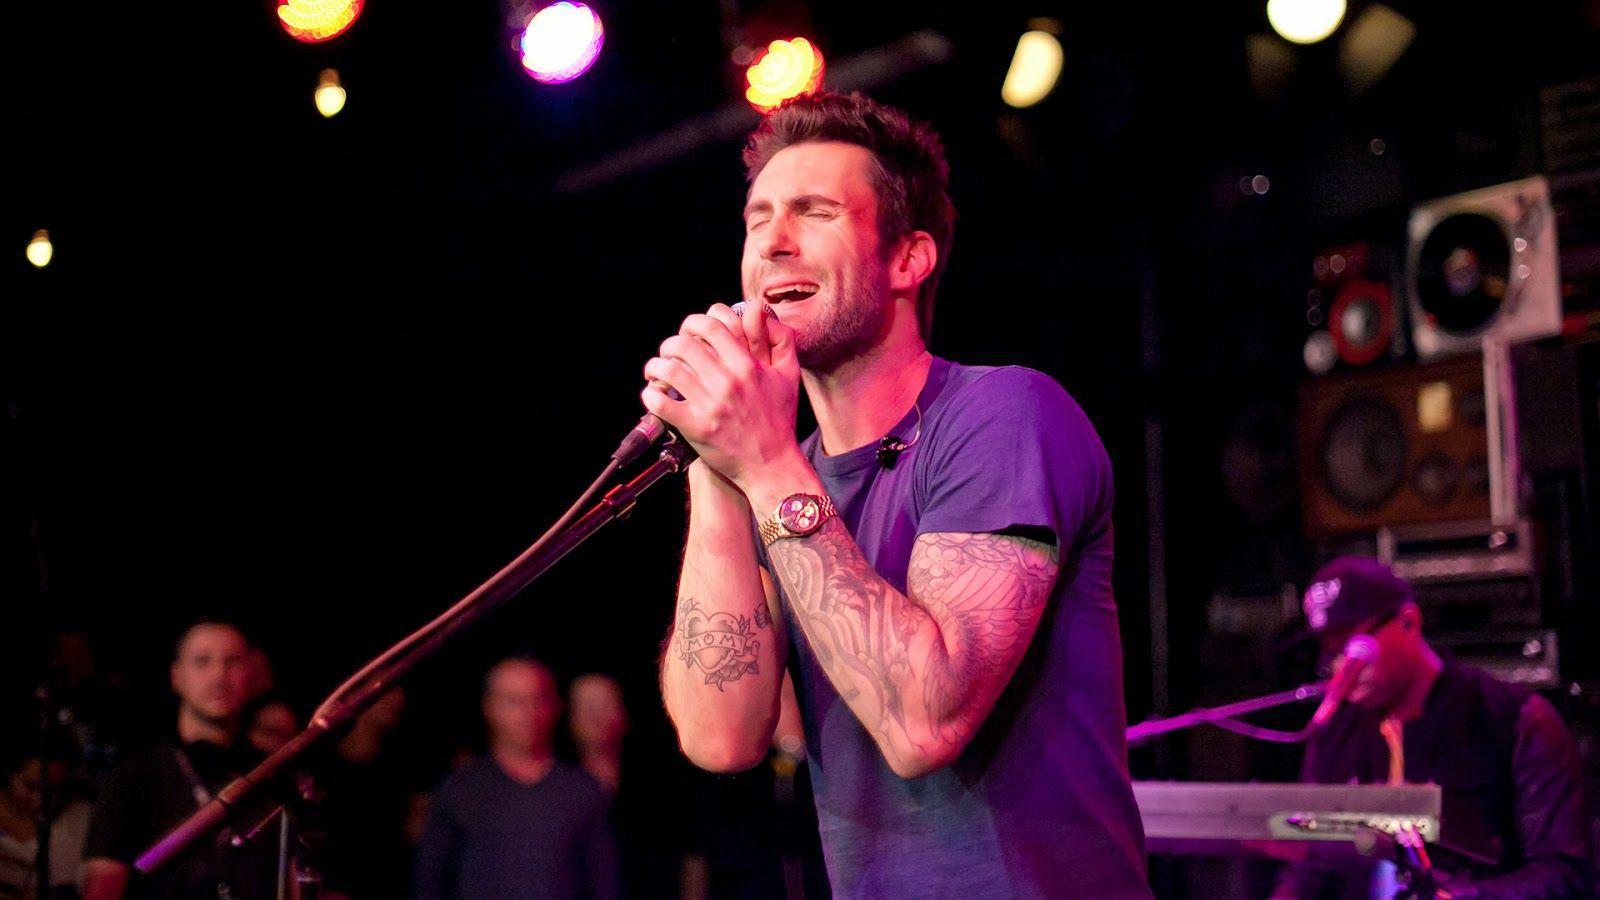 Adam Levine Stylish Stage Performance Image collections